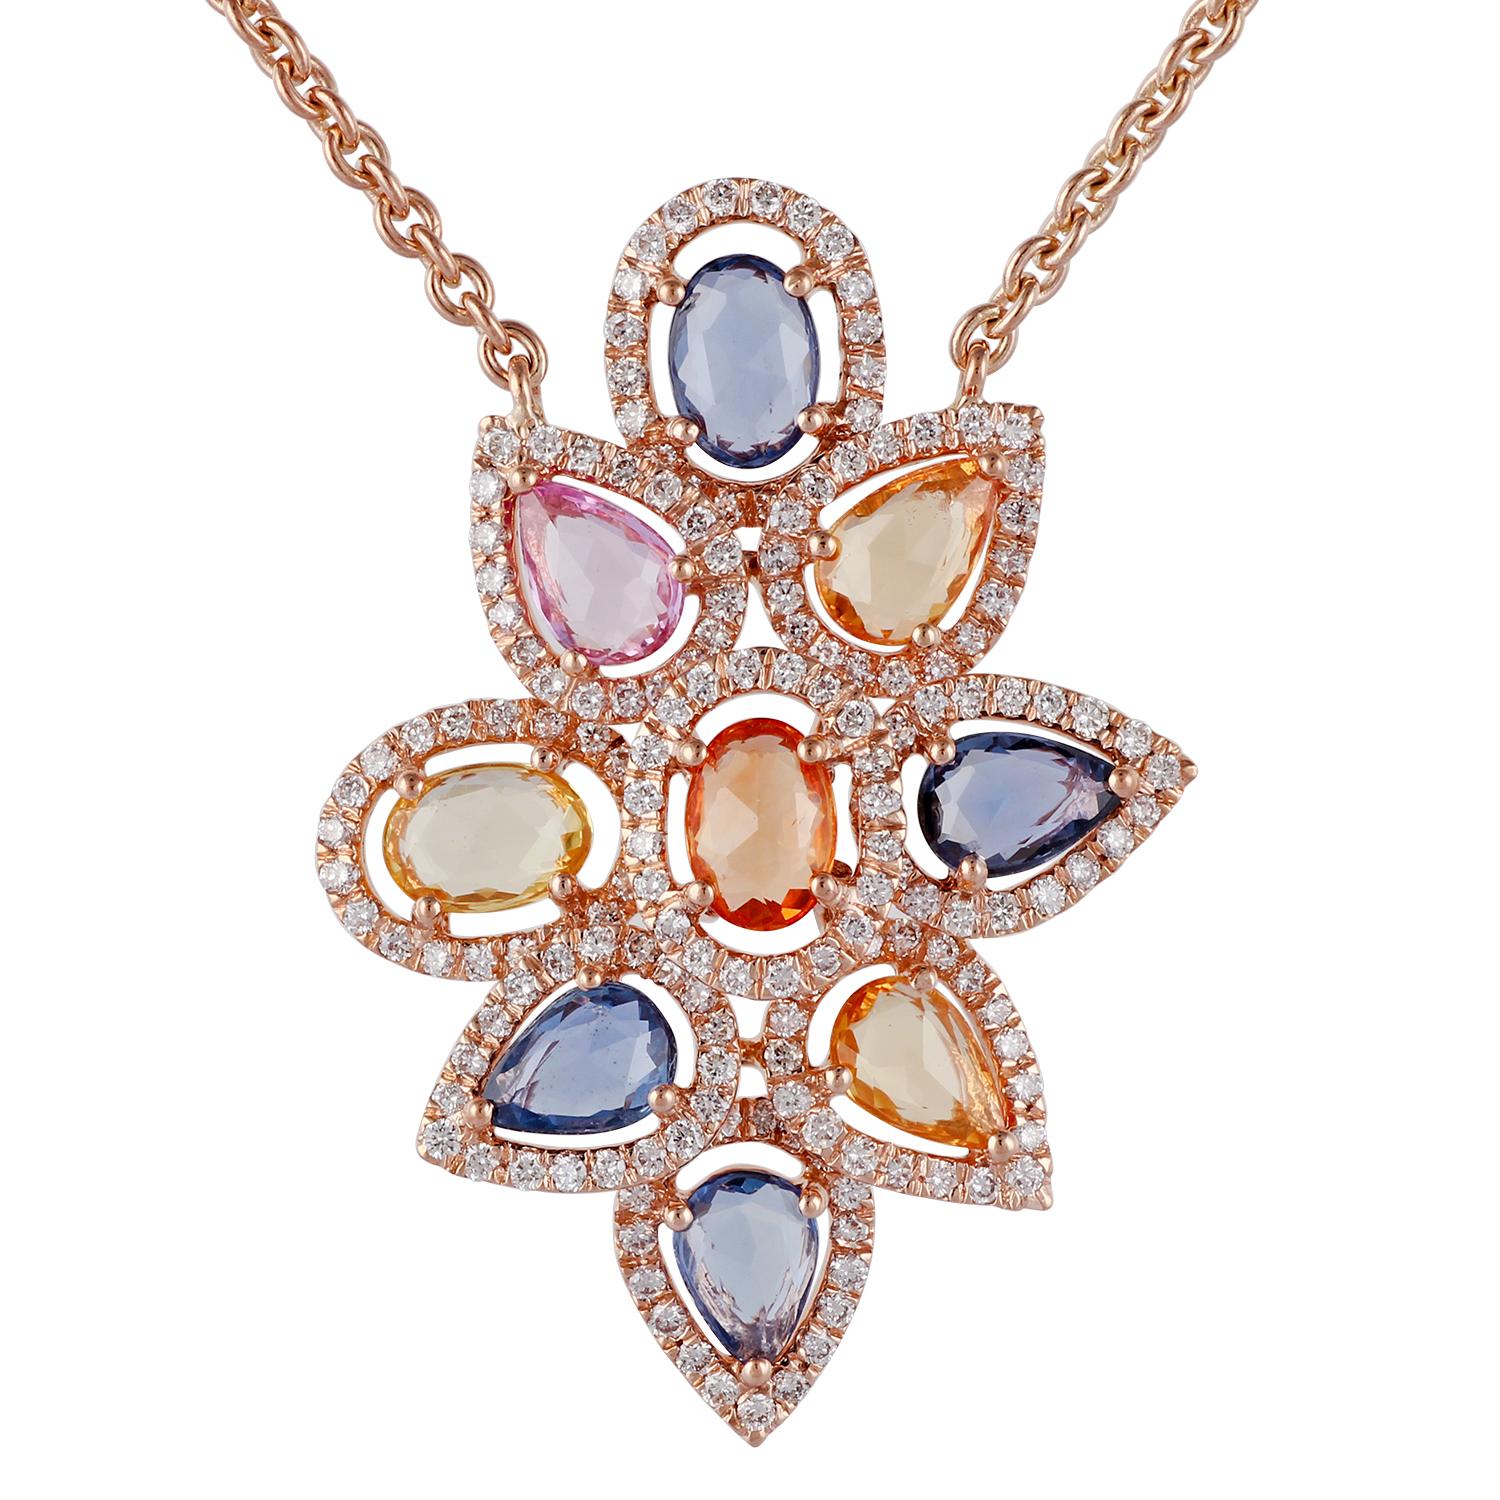 Oval Cut Multicolored Sapphires and Diamond Pendant Necklace, Set in 18 Karat Rose Gold For Sale